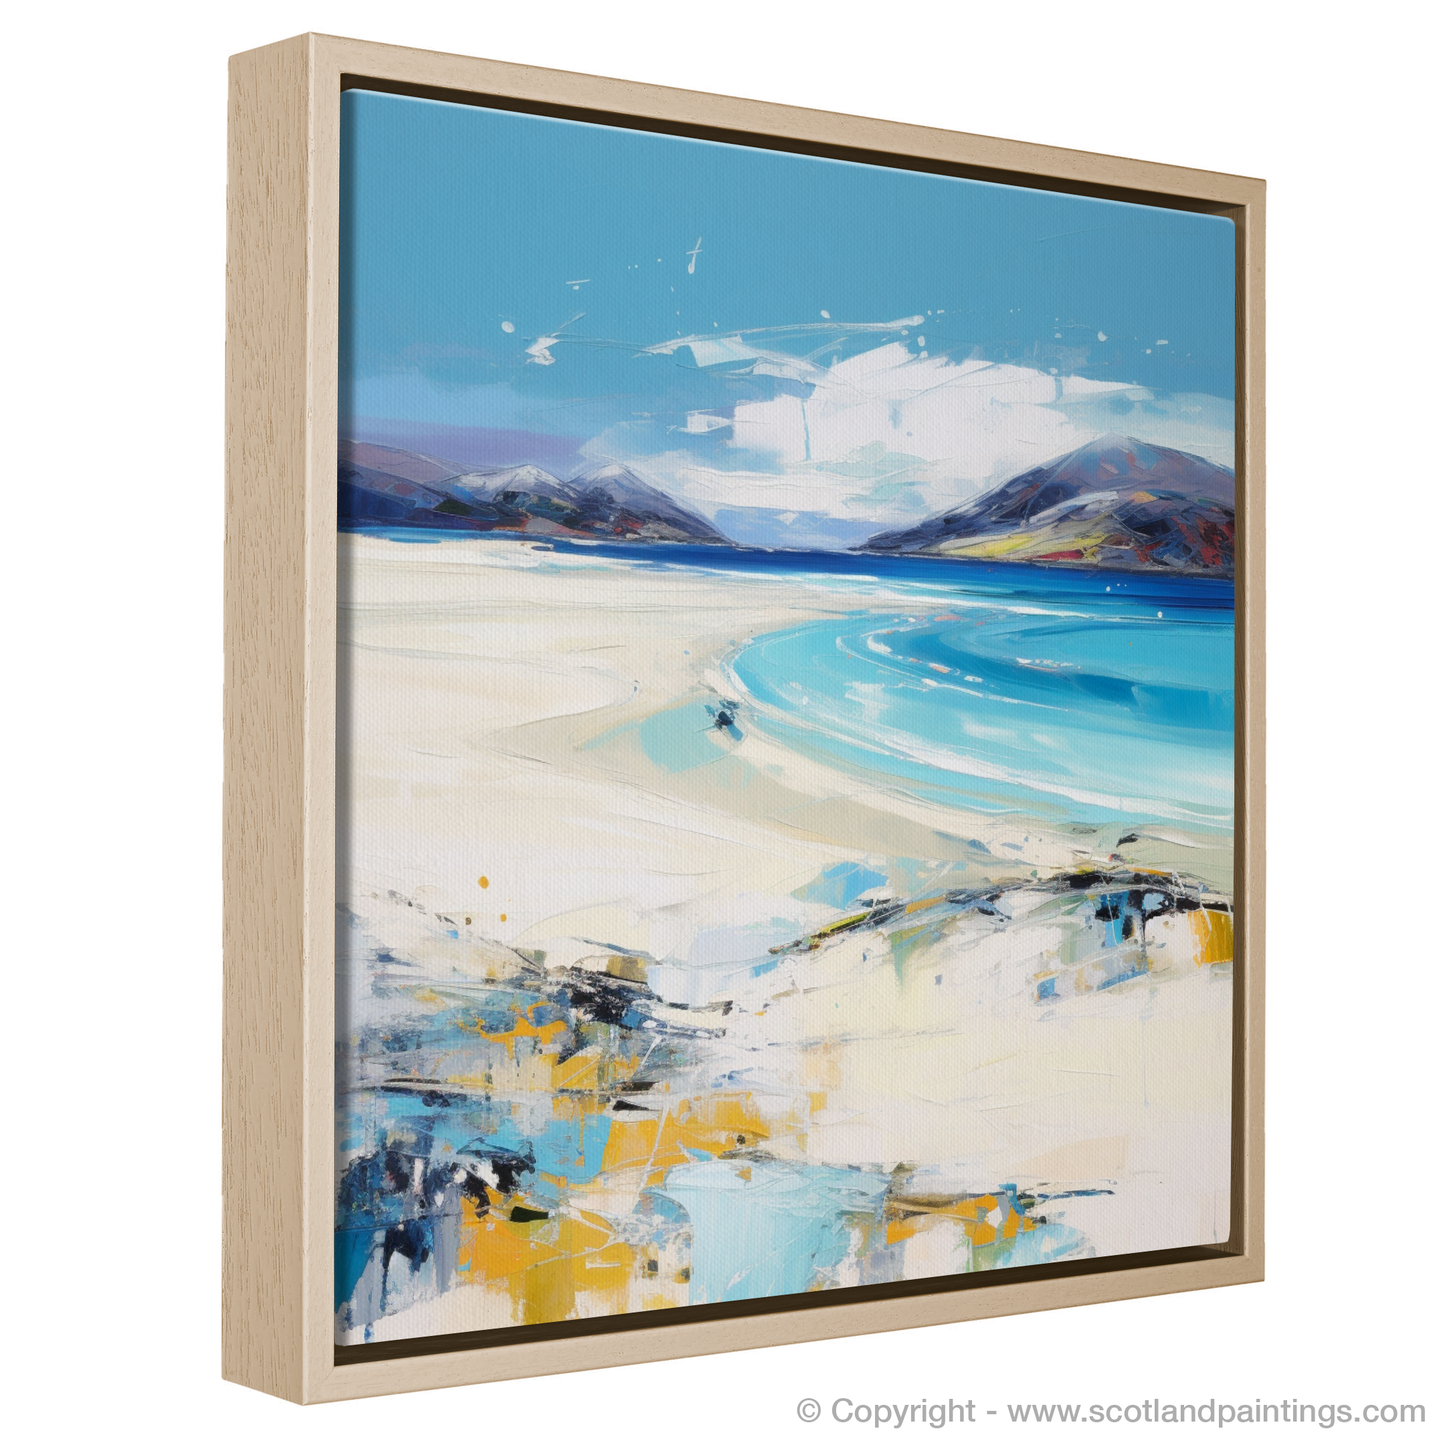 Painting and Art Print of Luskentyre Beach, Isle of Harris entitled "Luskentyre Beach Reverie: An Expressionist Tribute to Scottish Shores".